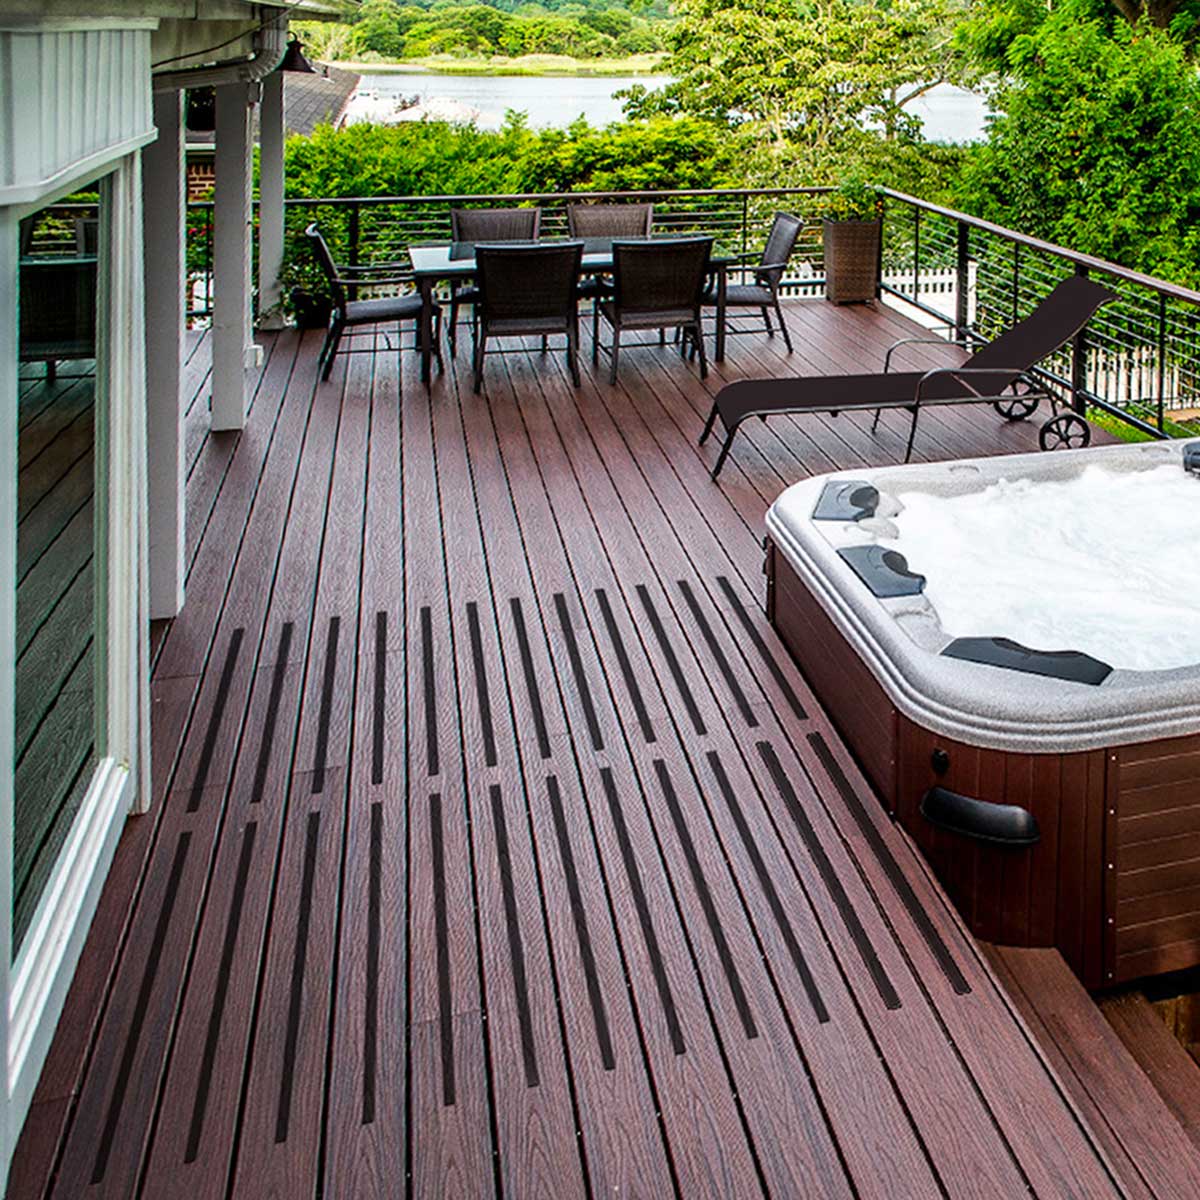 How To Install Non-Slip Tape On Your Deck